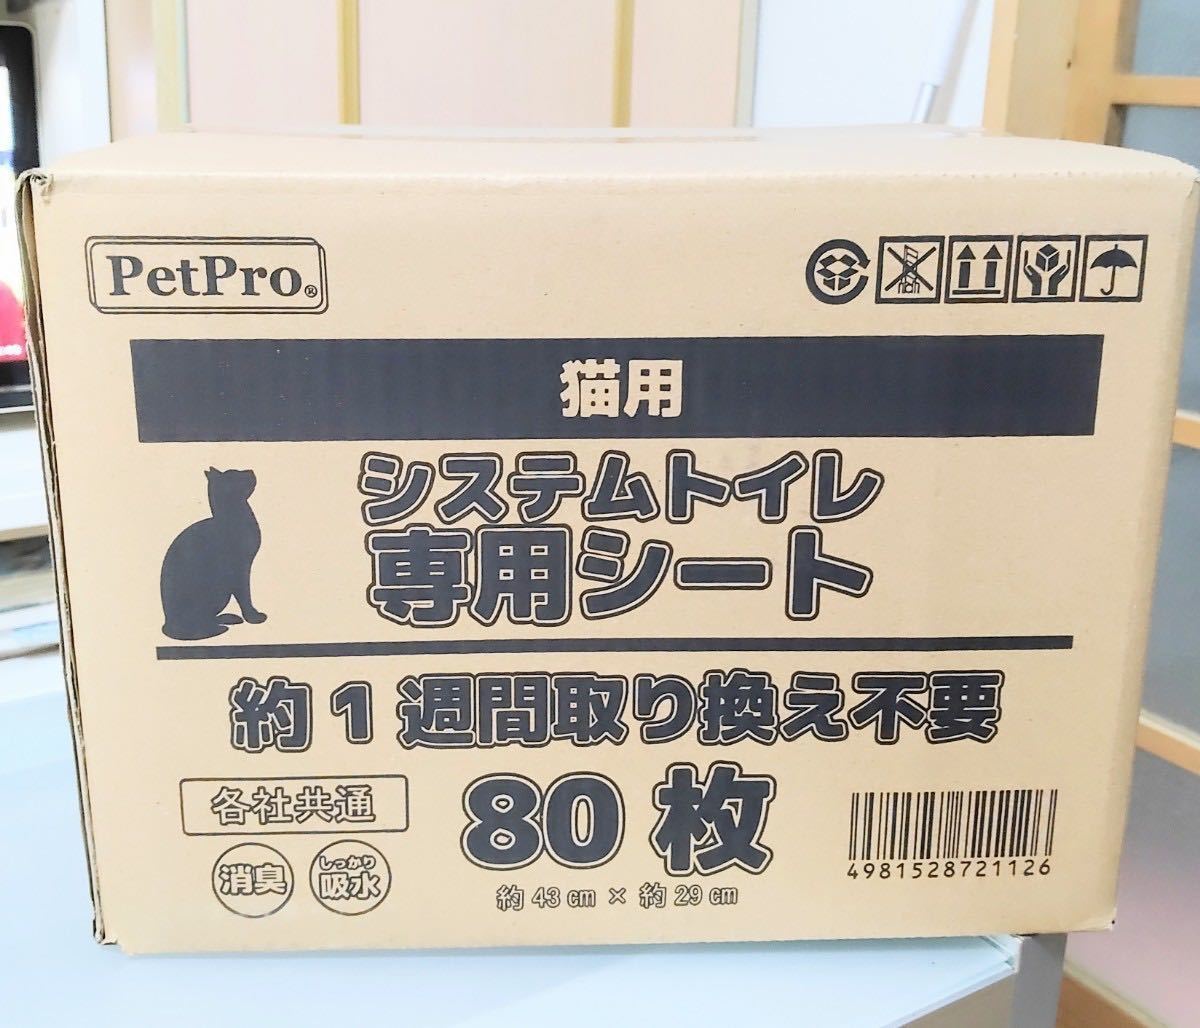 4 carton total 320 sheets each company common system toilet exclusive use deodorization seat 80 sheets insertion ⑧126 pet Pro PetPro approximately 43cm× approximately 29cm 4981528721126